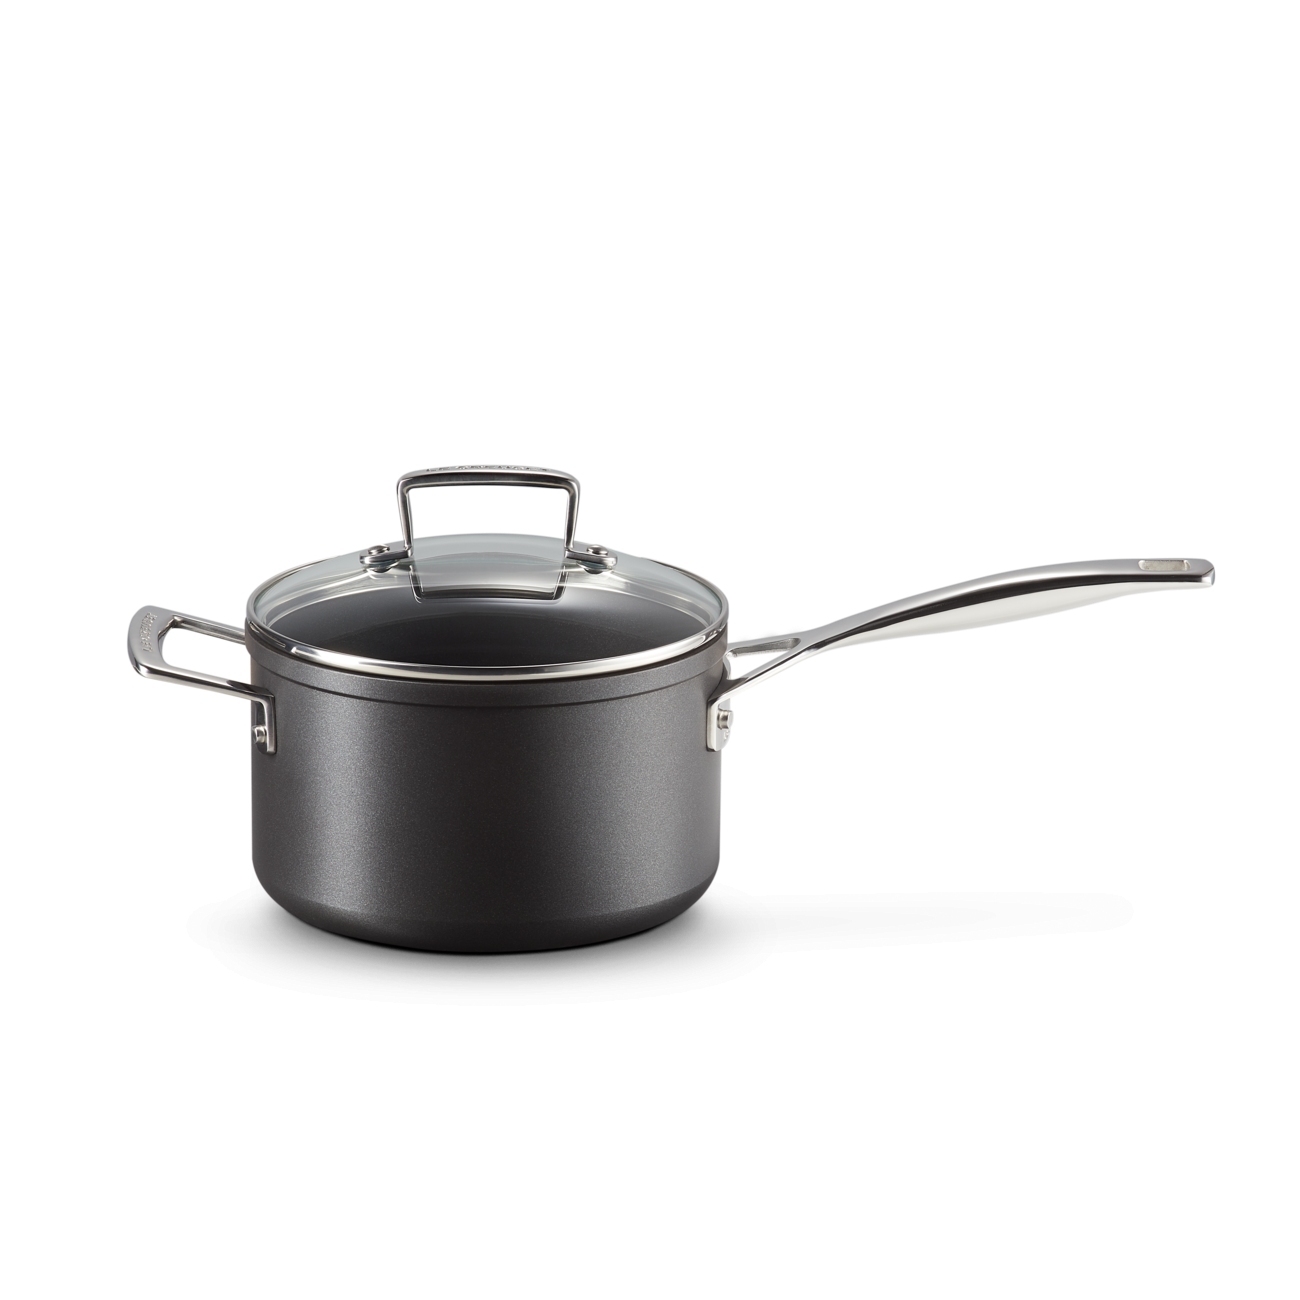 https://www.tattahome.com/52854-large_default/le-creuset-non-stick-saucepan-with-handle-and-glass-lid-20.jpg